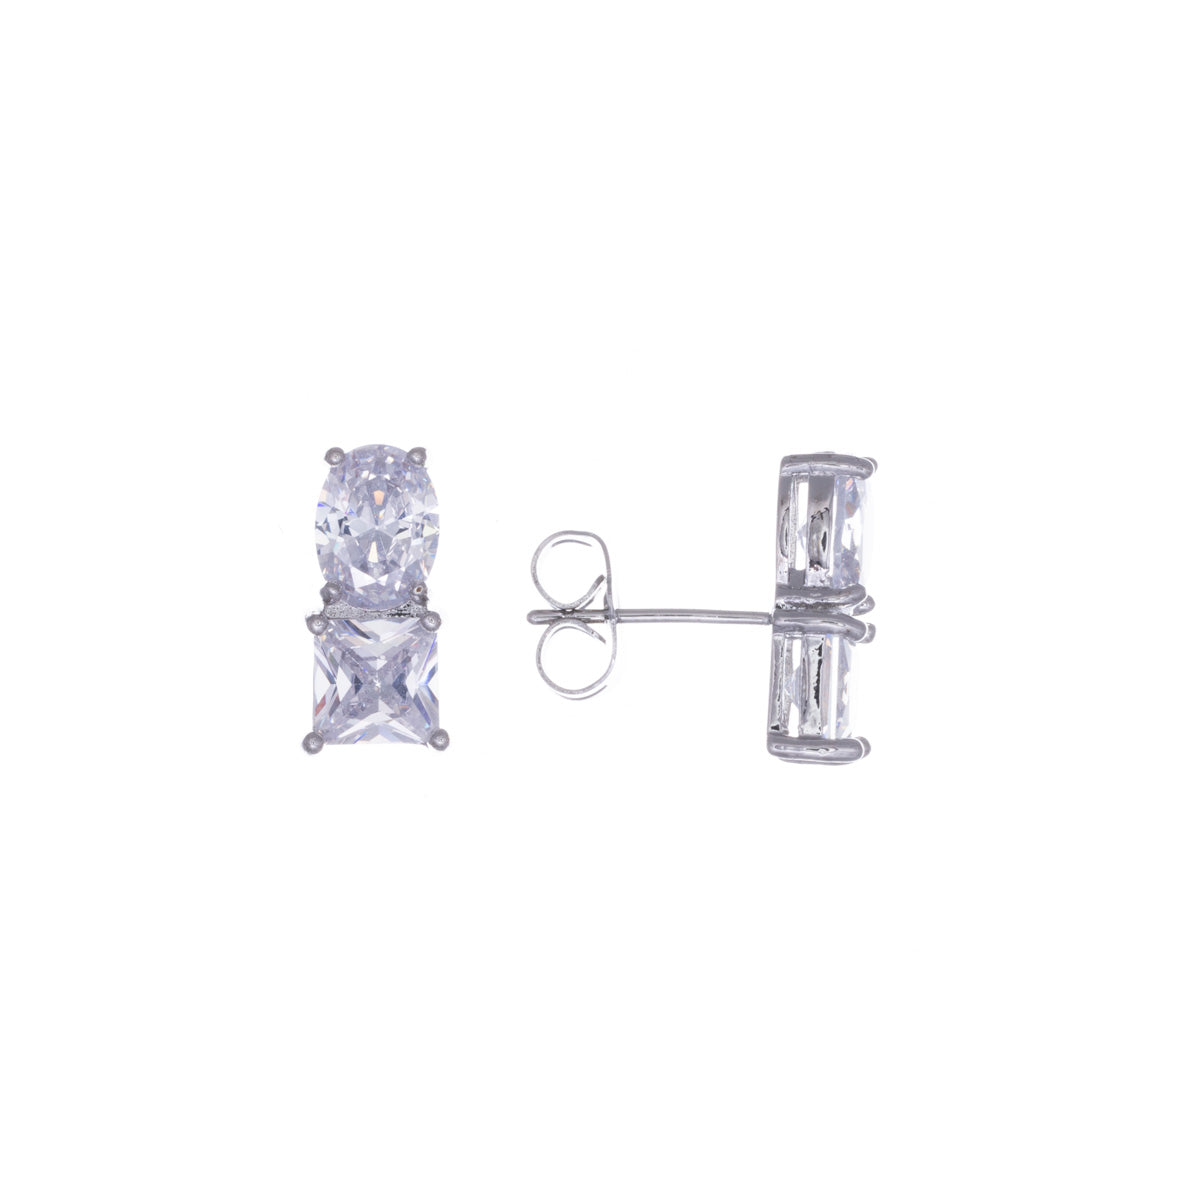 Zirconia earrings square and oval